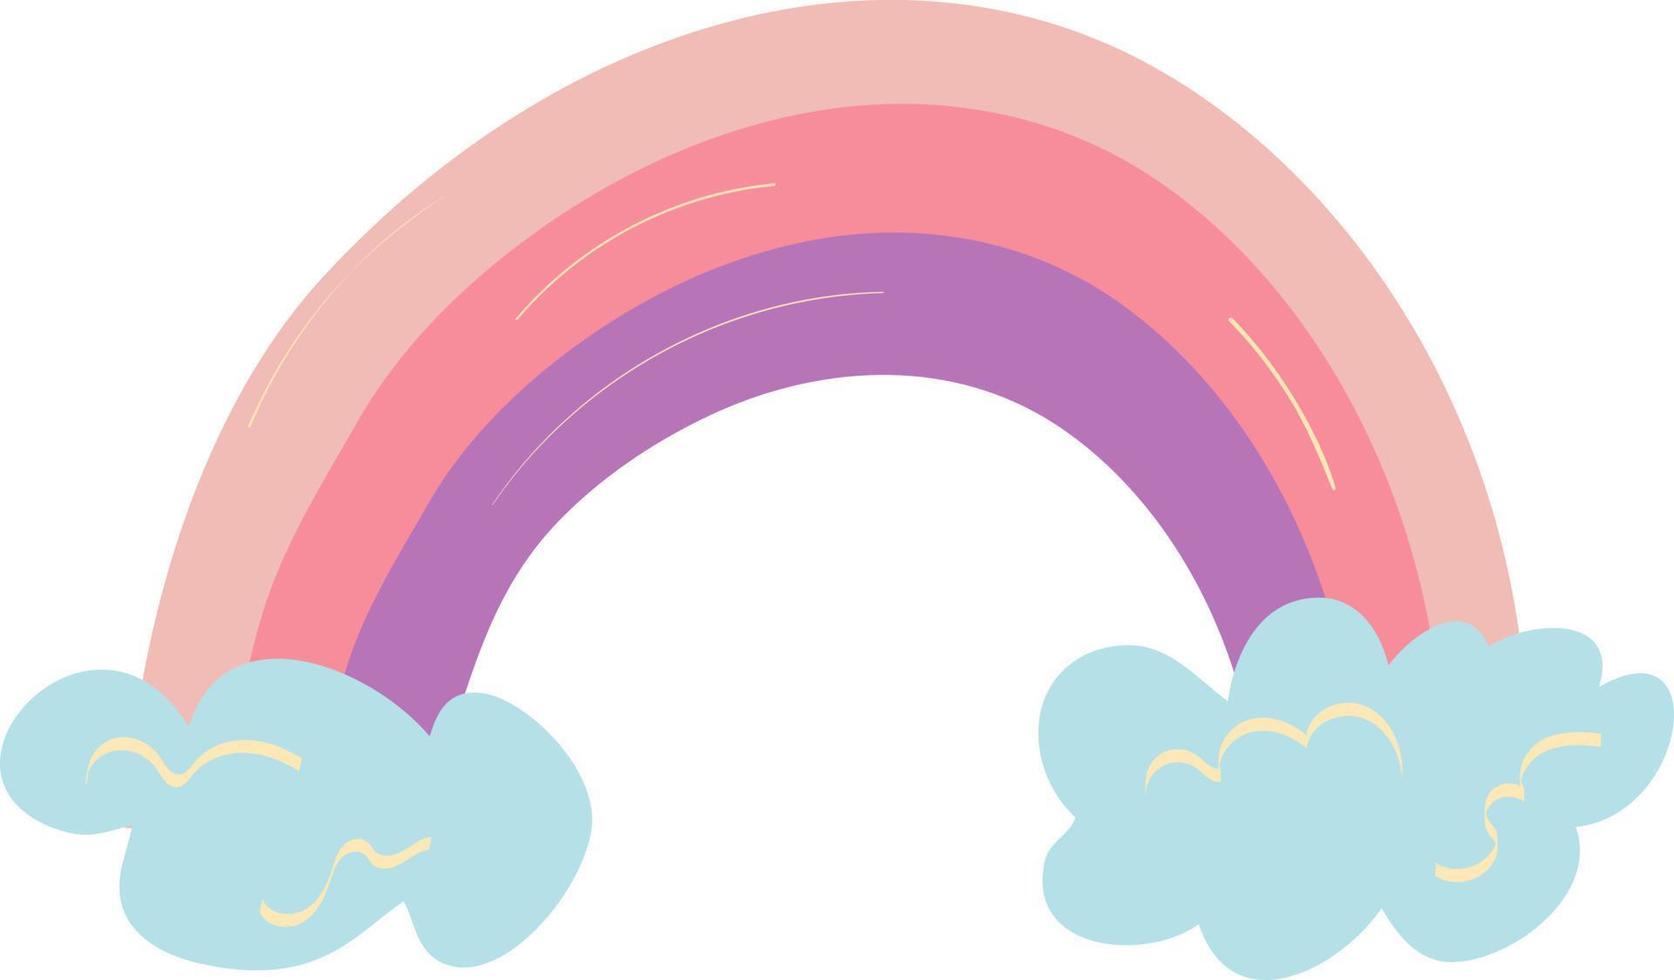 Rainbow in naive style vector